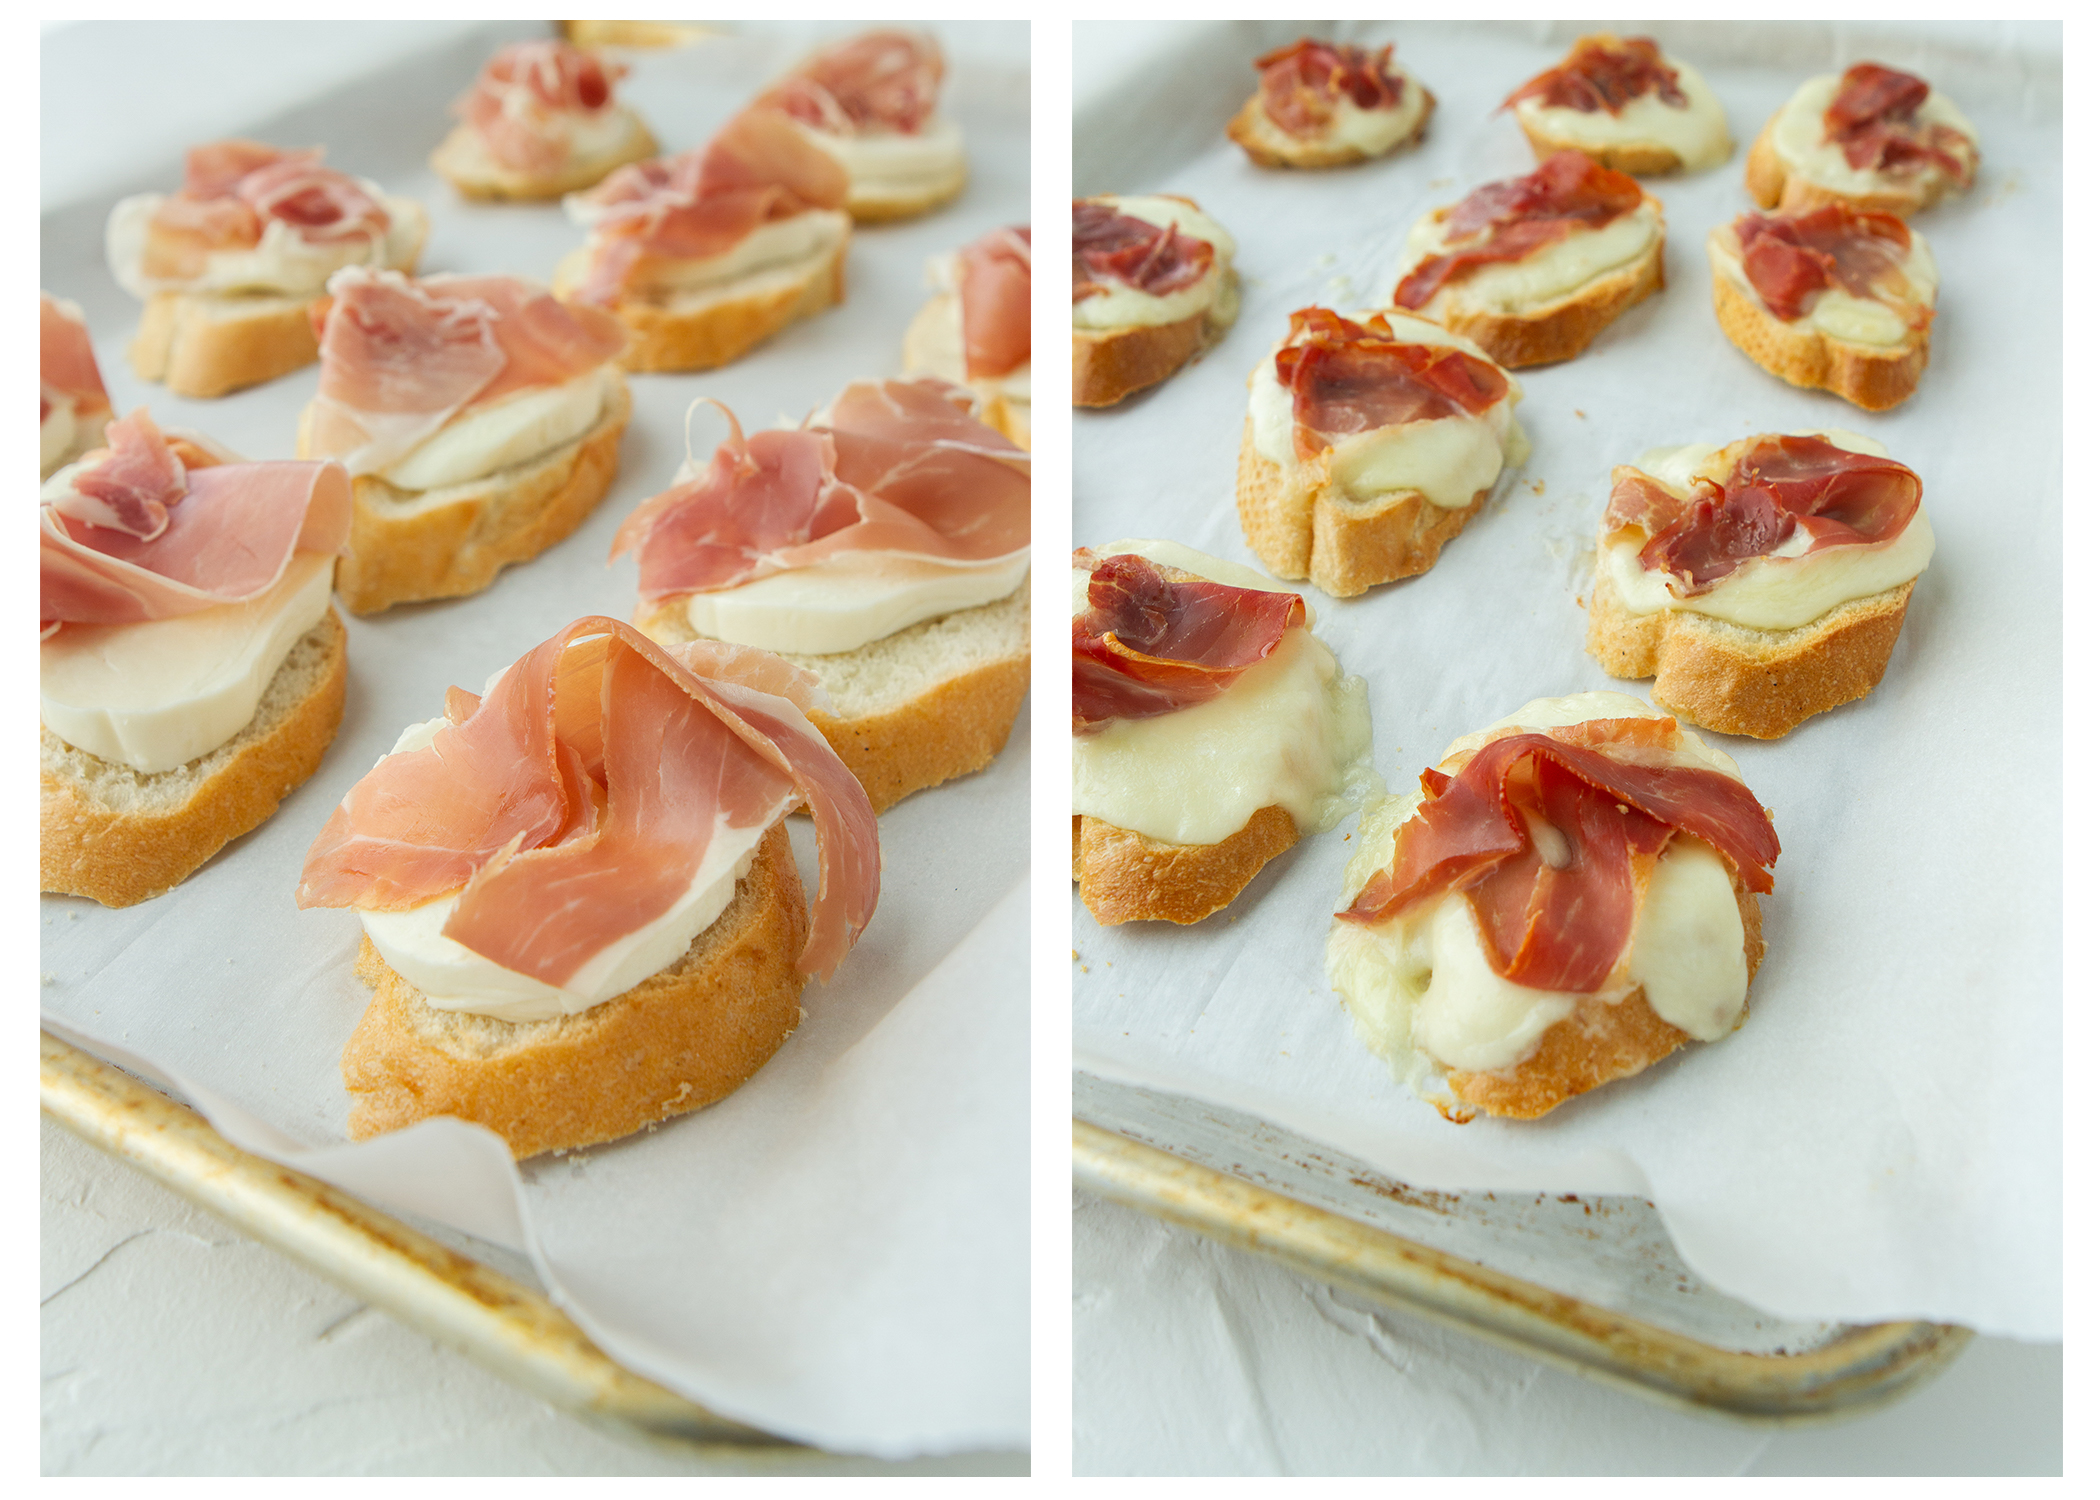 prosciutto melts prepared and baked